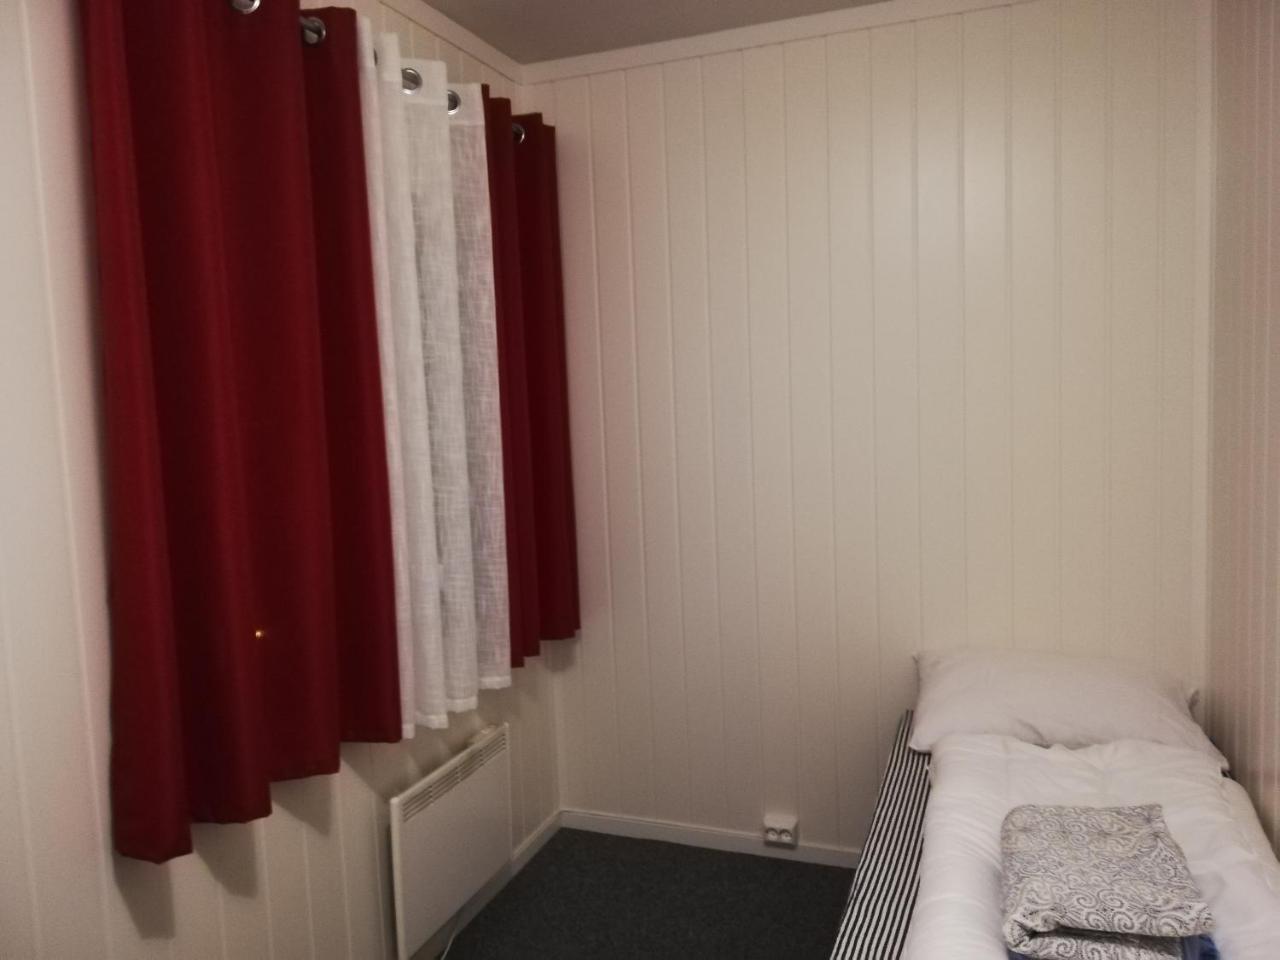 Tromso Bed And Room 外观 照片